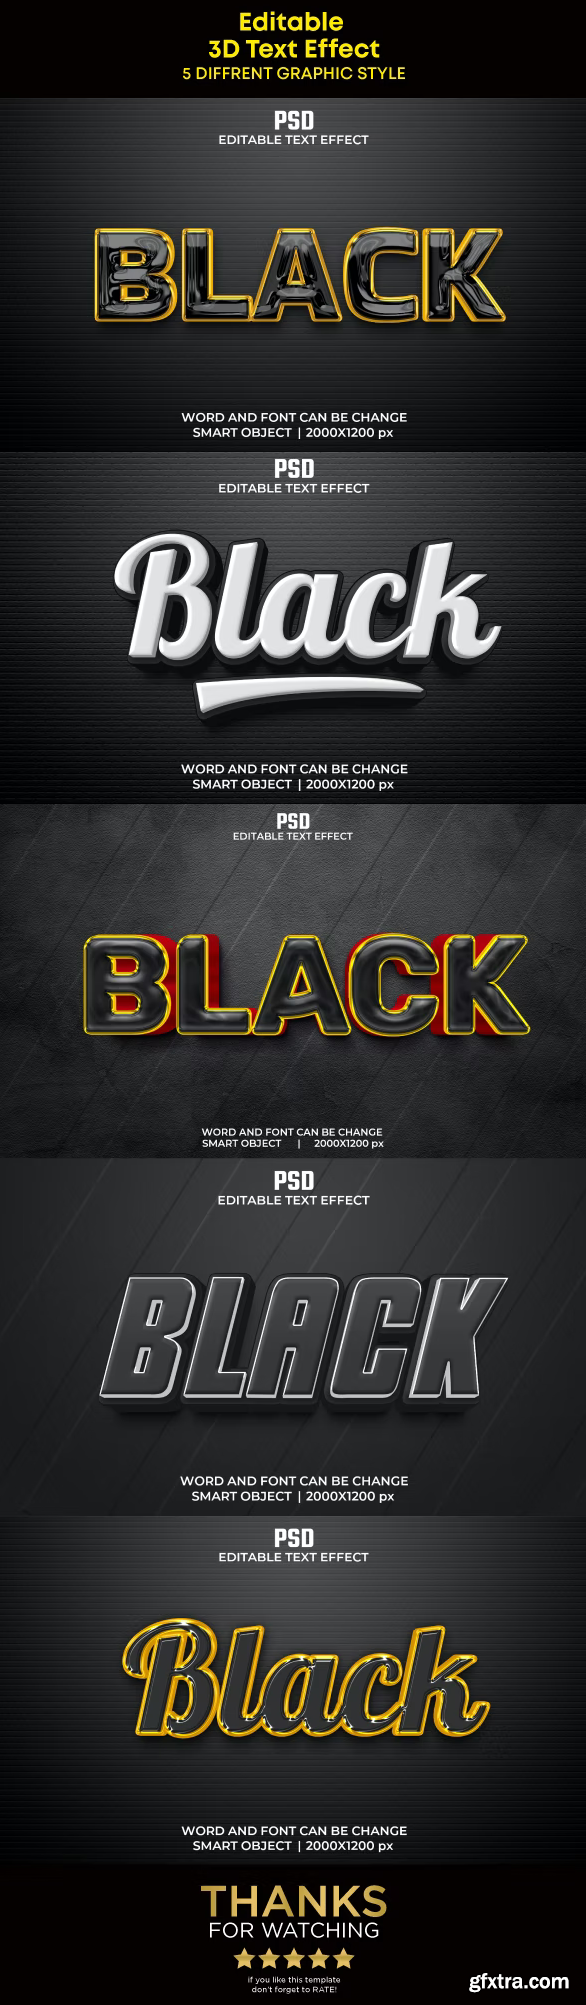 GraphicRiver - 5 Black 3D Editable Text Effects Pack 37083488 » GFxtra